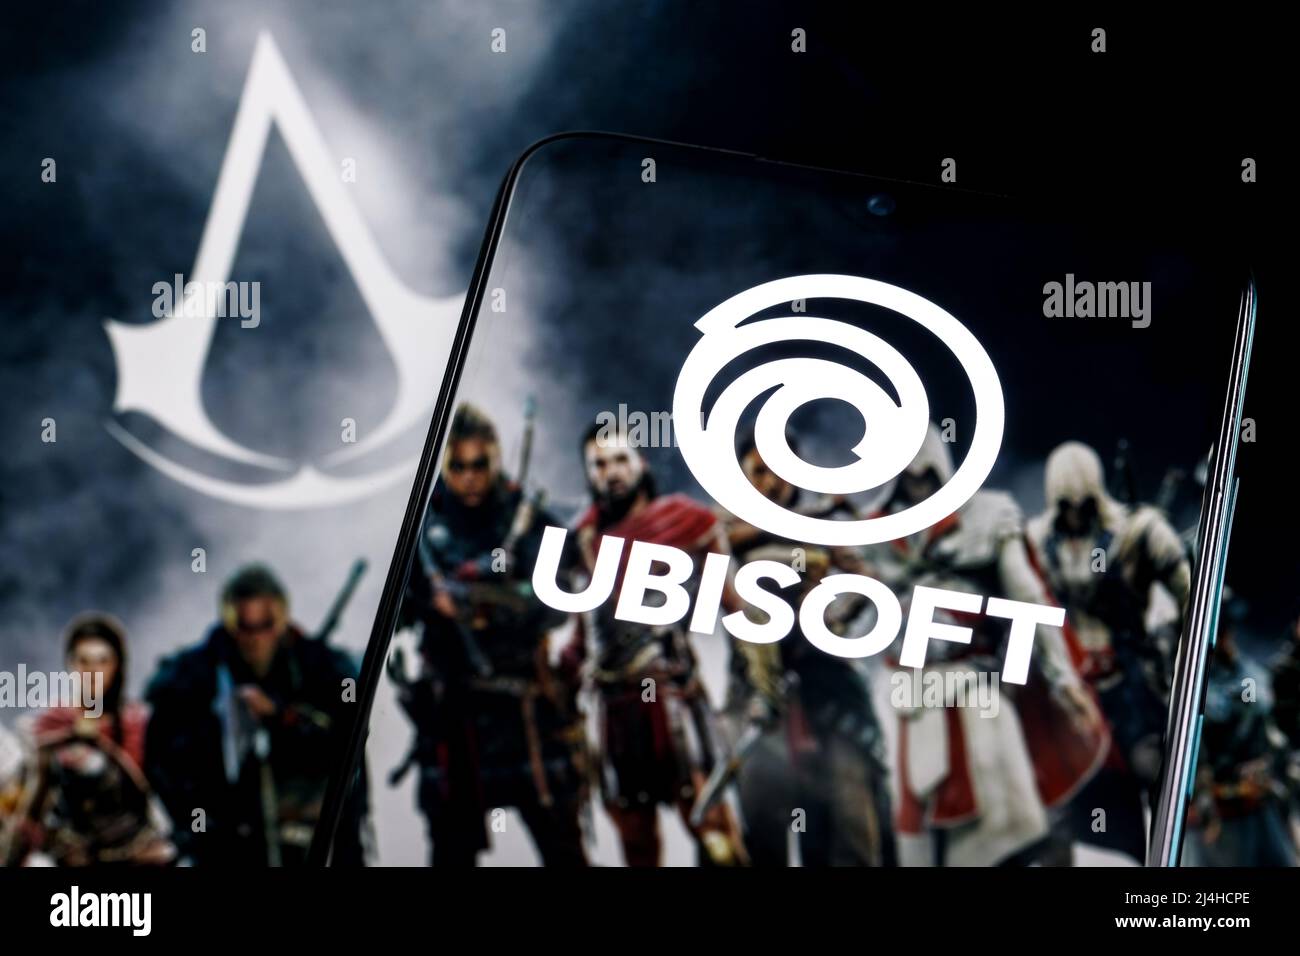 Ubisoft is French video game company. Ubisoft logo on smartphone screen. Frame from Assassin Creed franchise game on background. Stock Photo